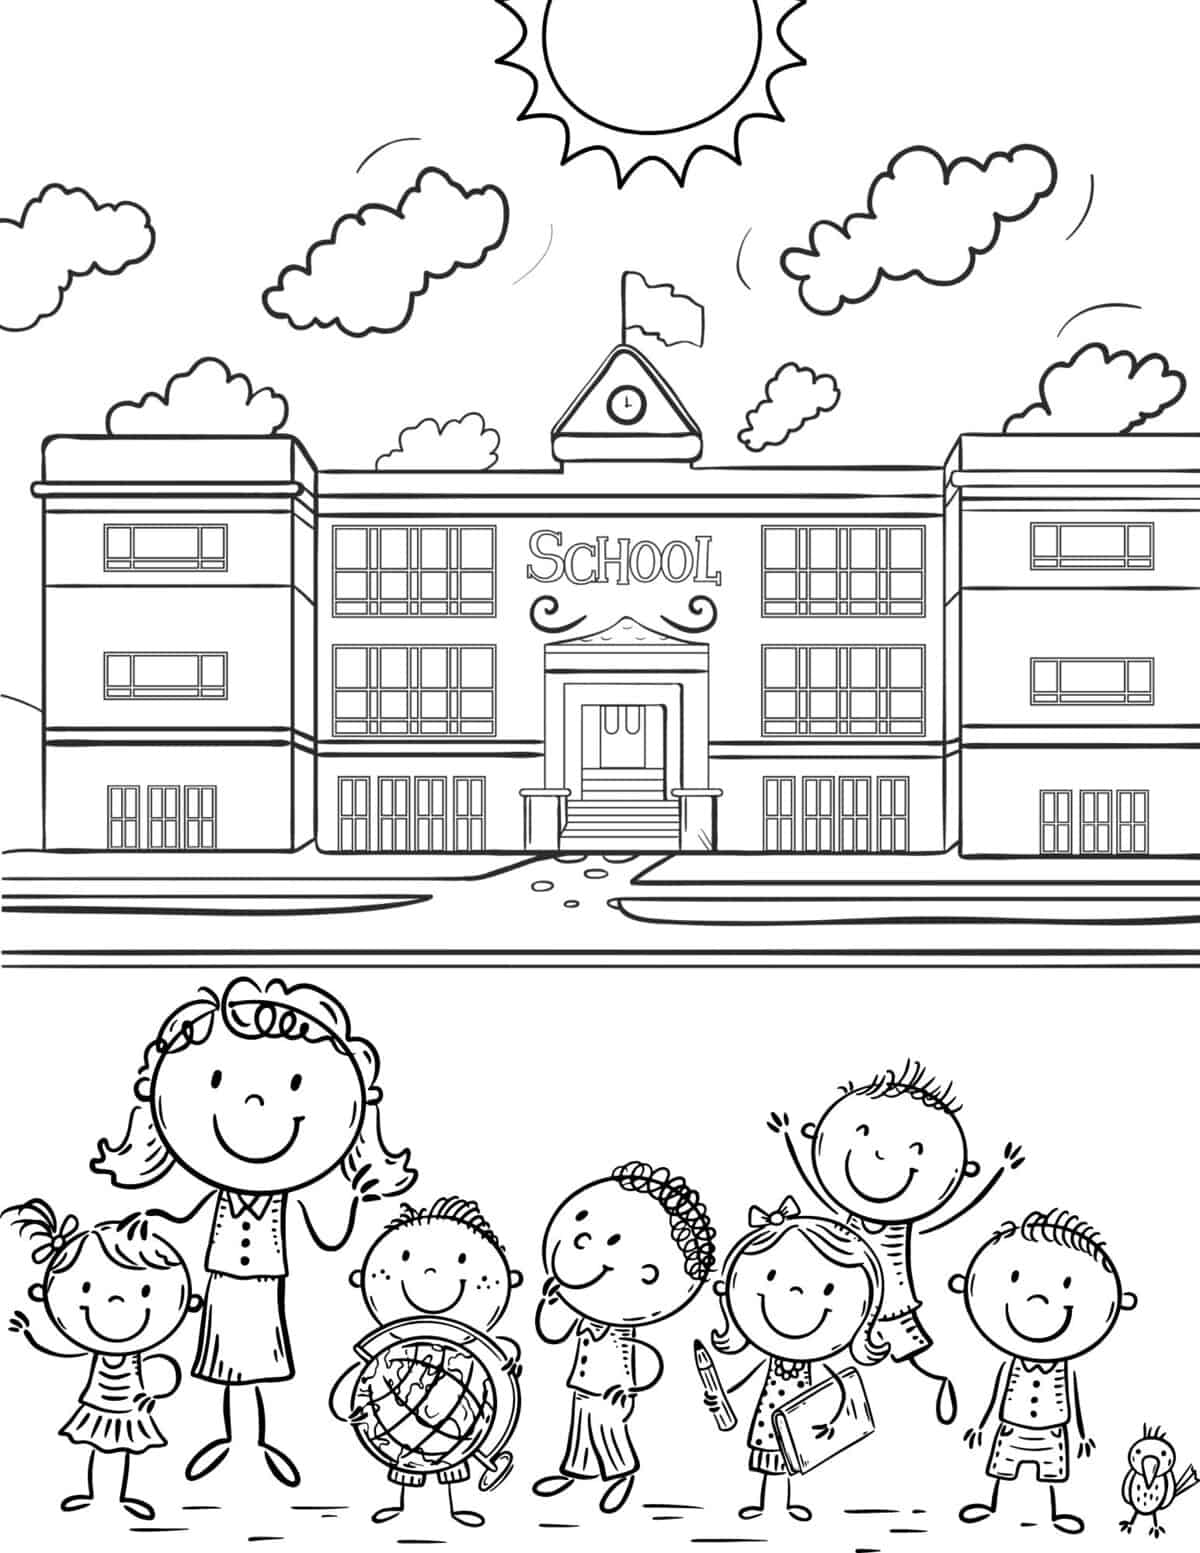 teacher, students and school coloring page